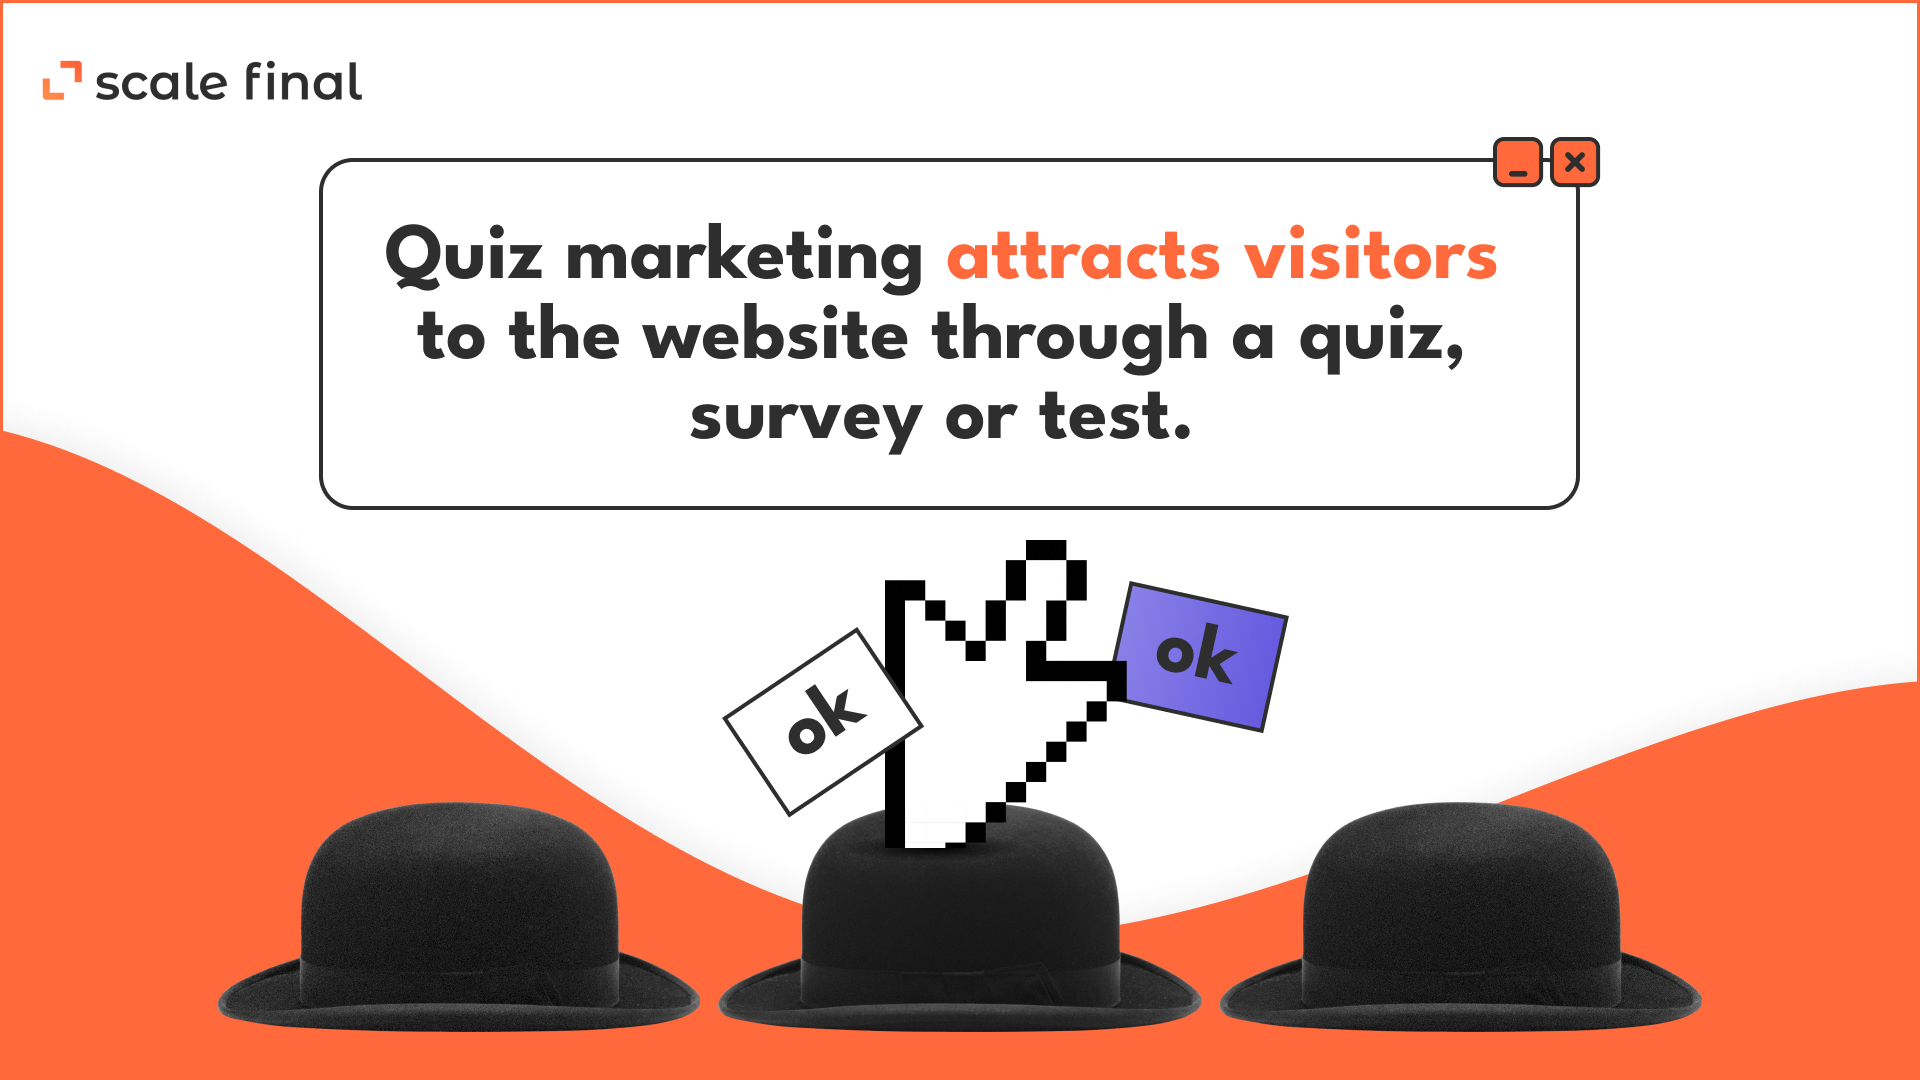 Quiz marketing attracts visitors to the website through a quiz, survey or test.